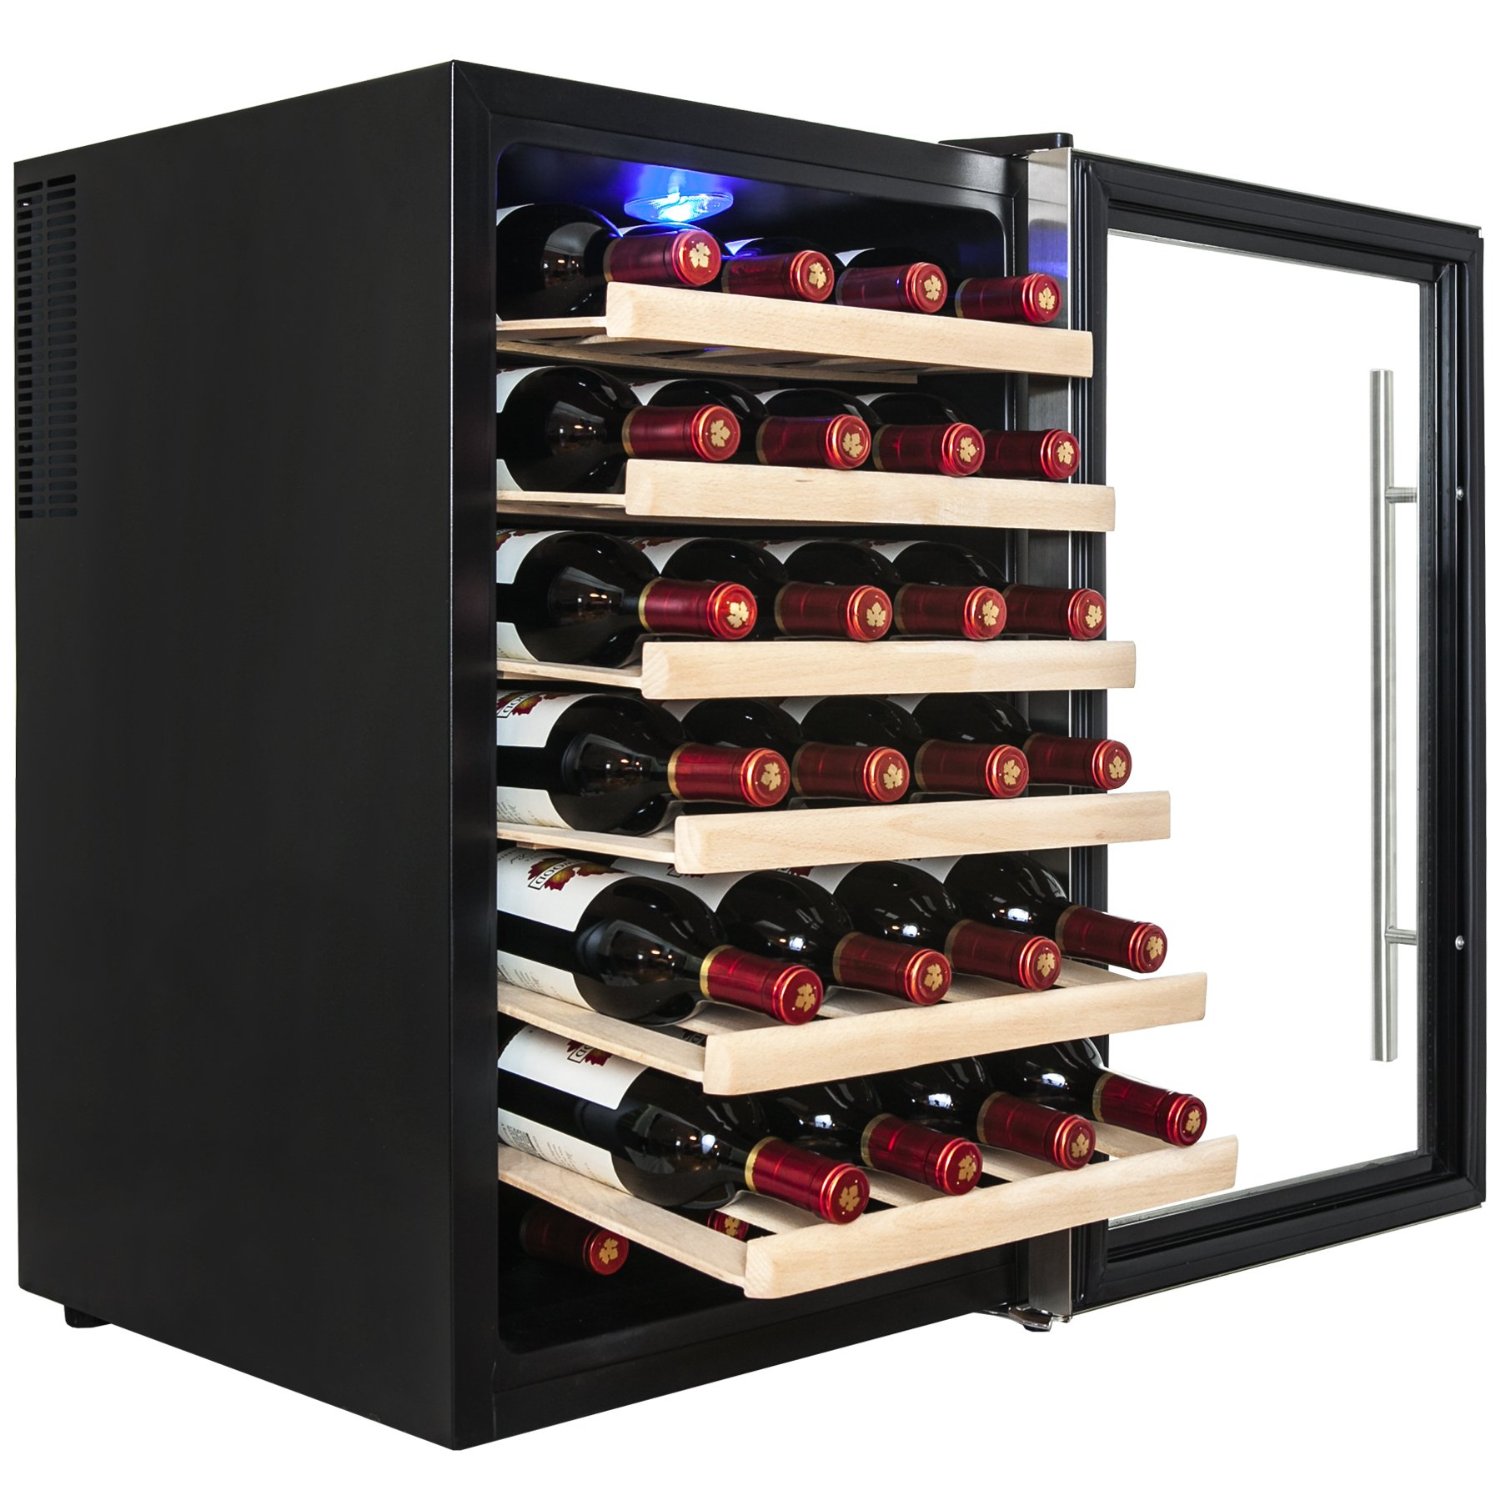 Firebird New 28-bottle Thermoelectric Wine Cooler-WC0016